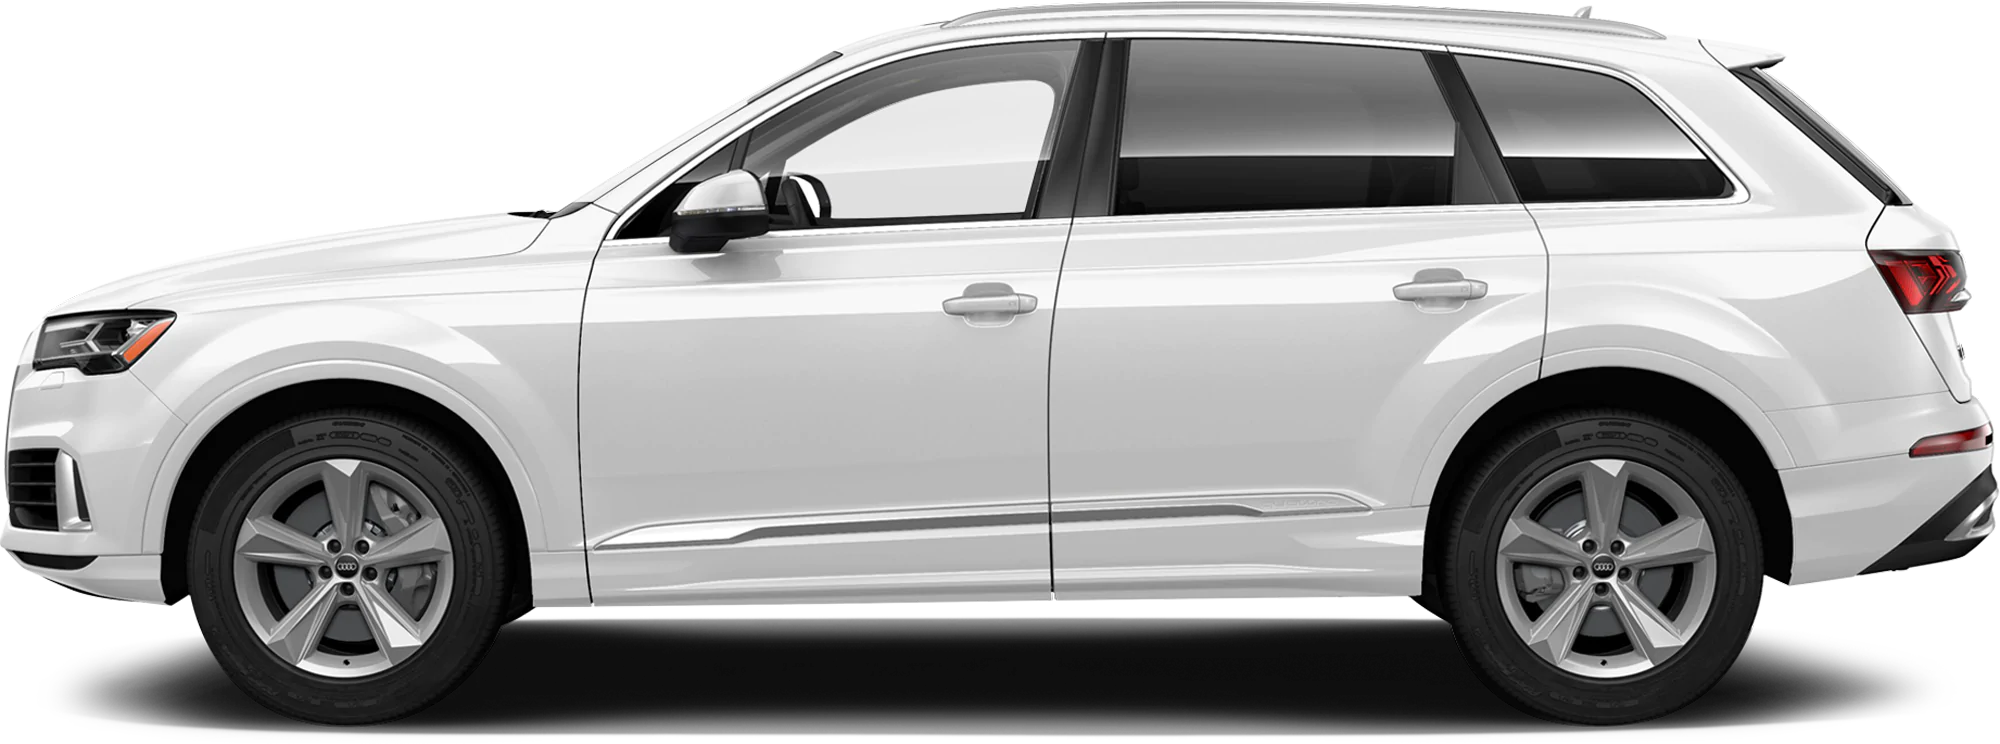 Side View Audi SUV PNG Image